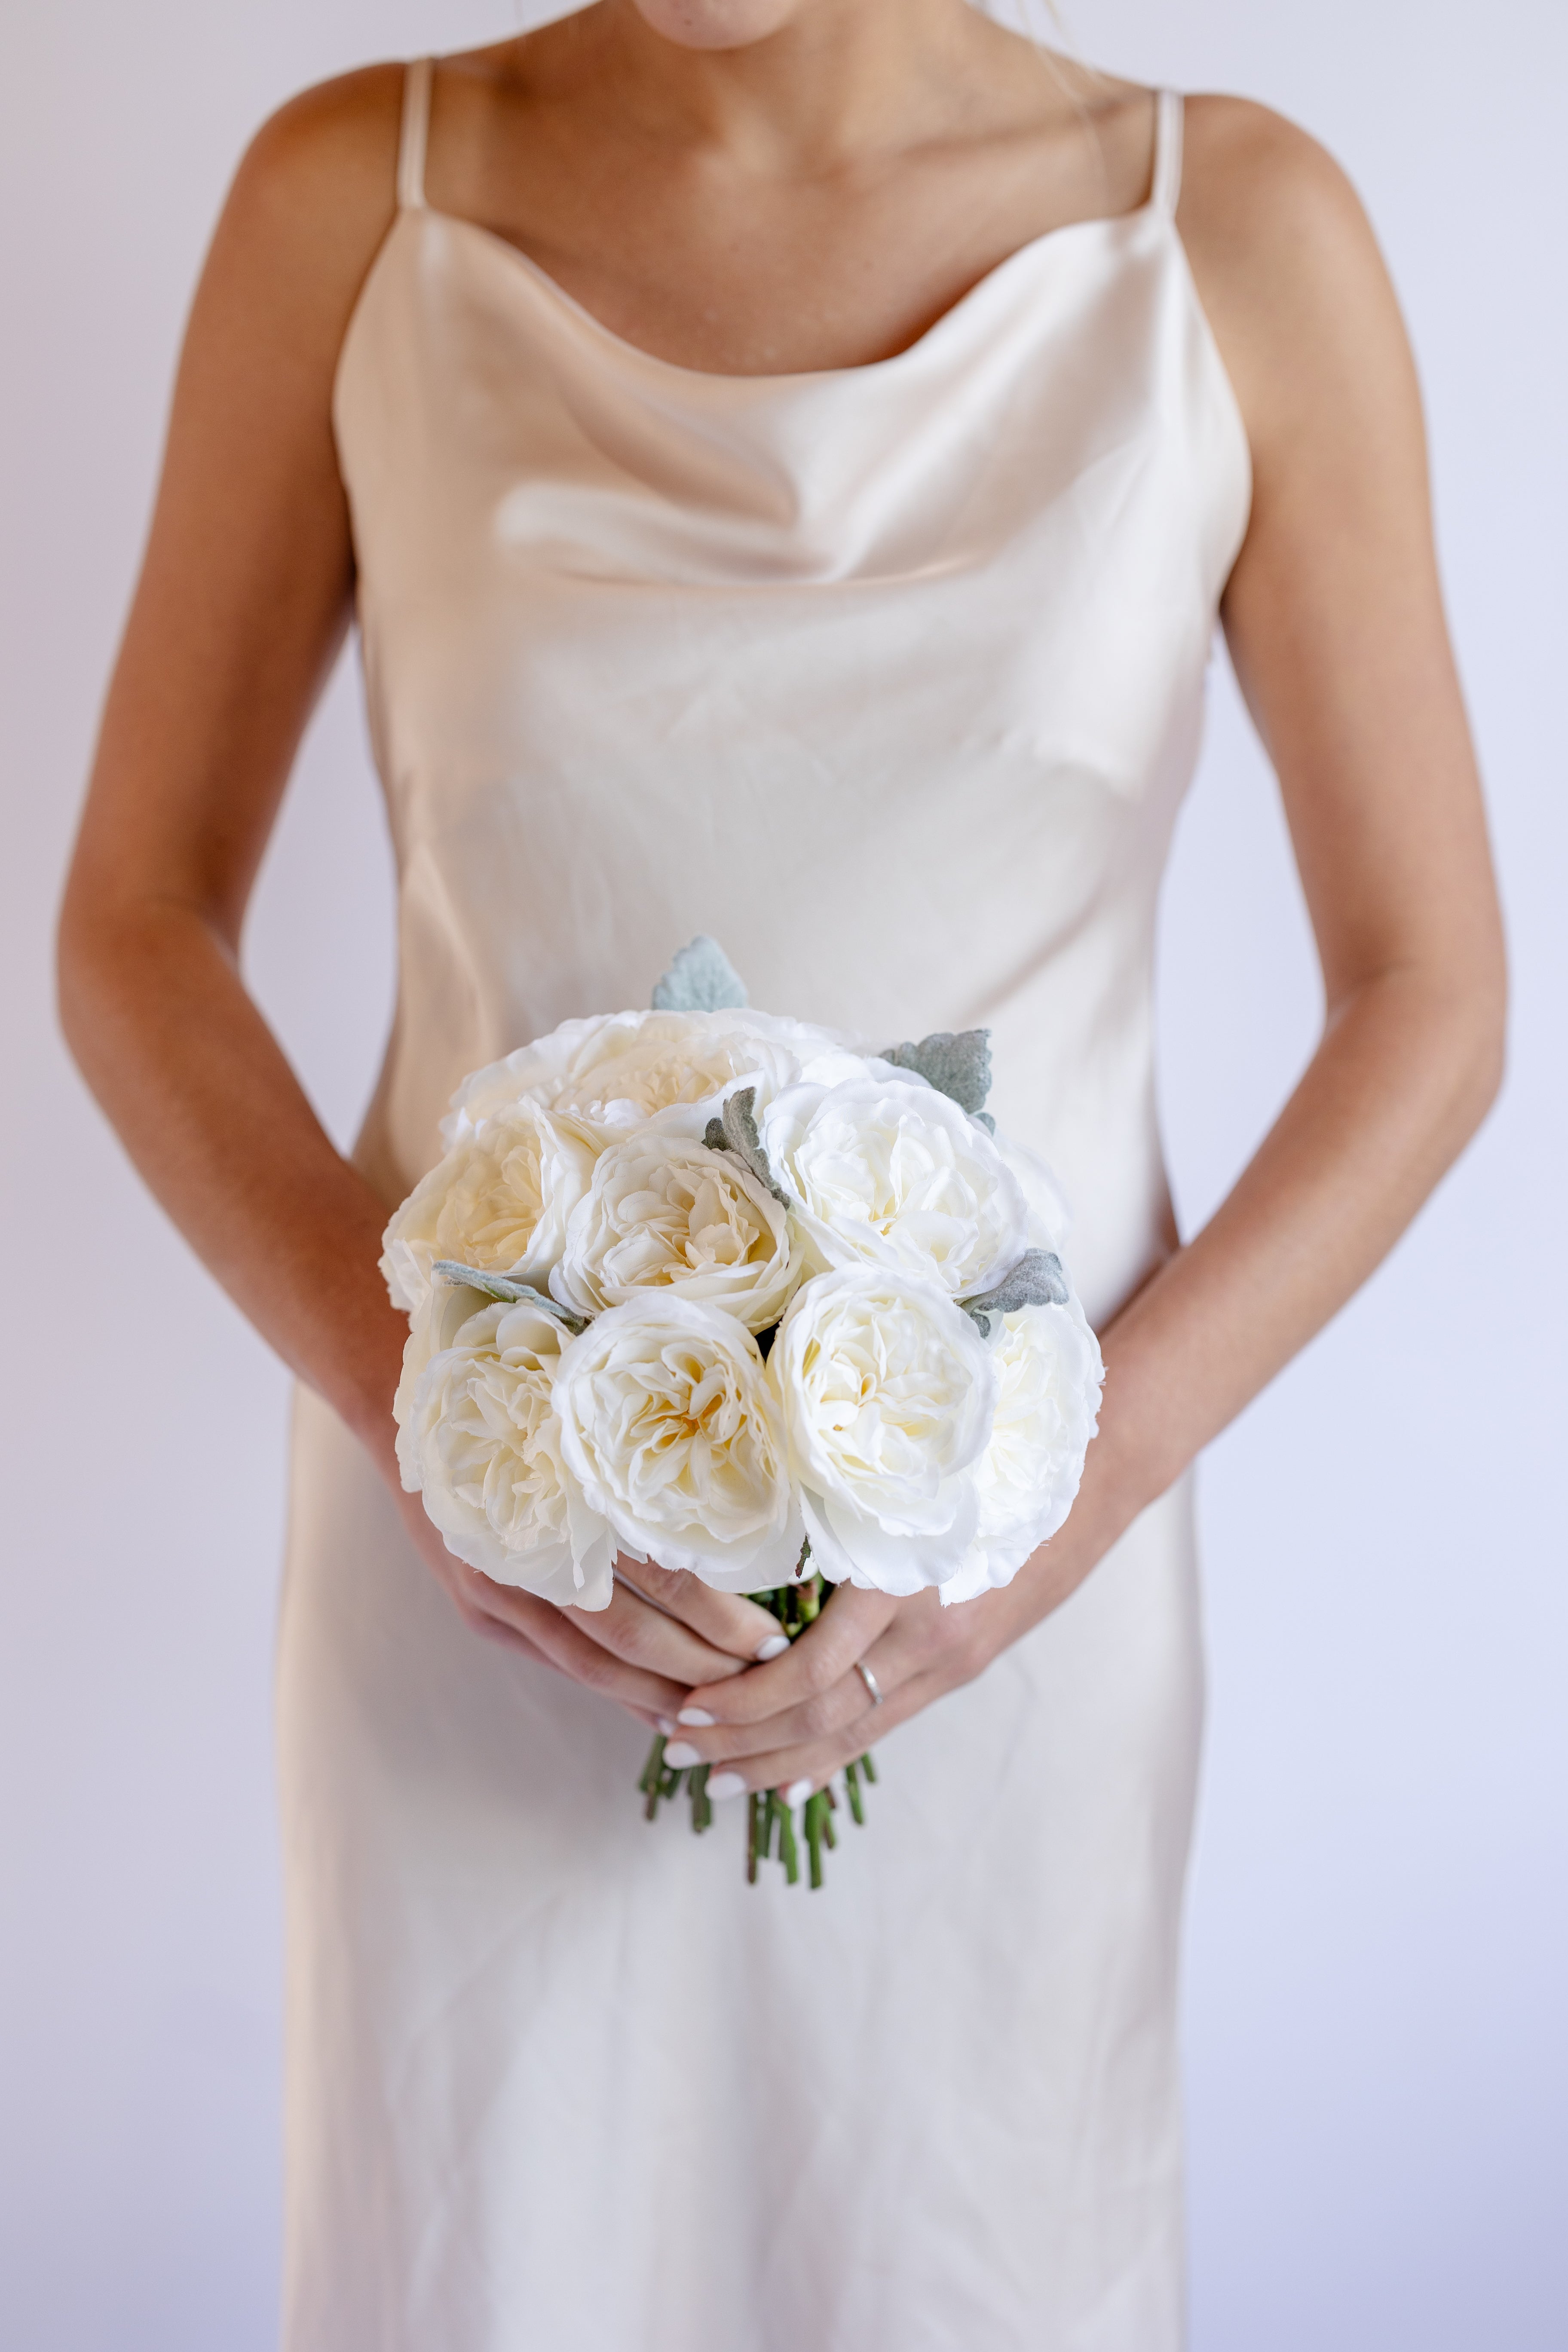 Aspen　Wedding　–　Bridesmaid　Flowers　Wedding　Rent　for　For　Rent　Collection　Bouquet　Flowers